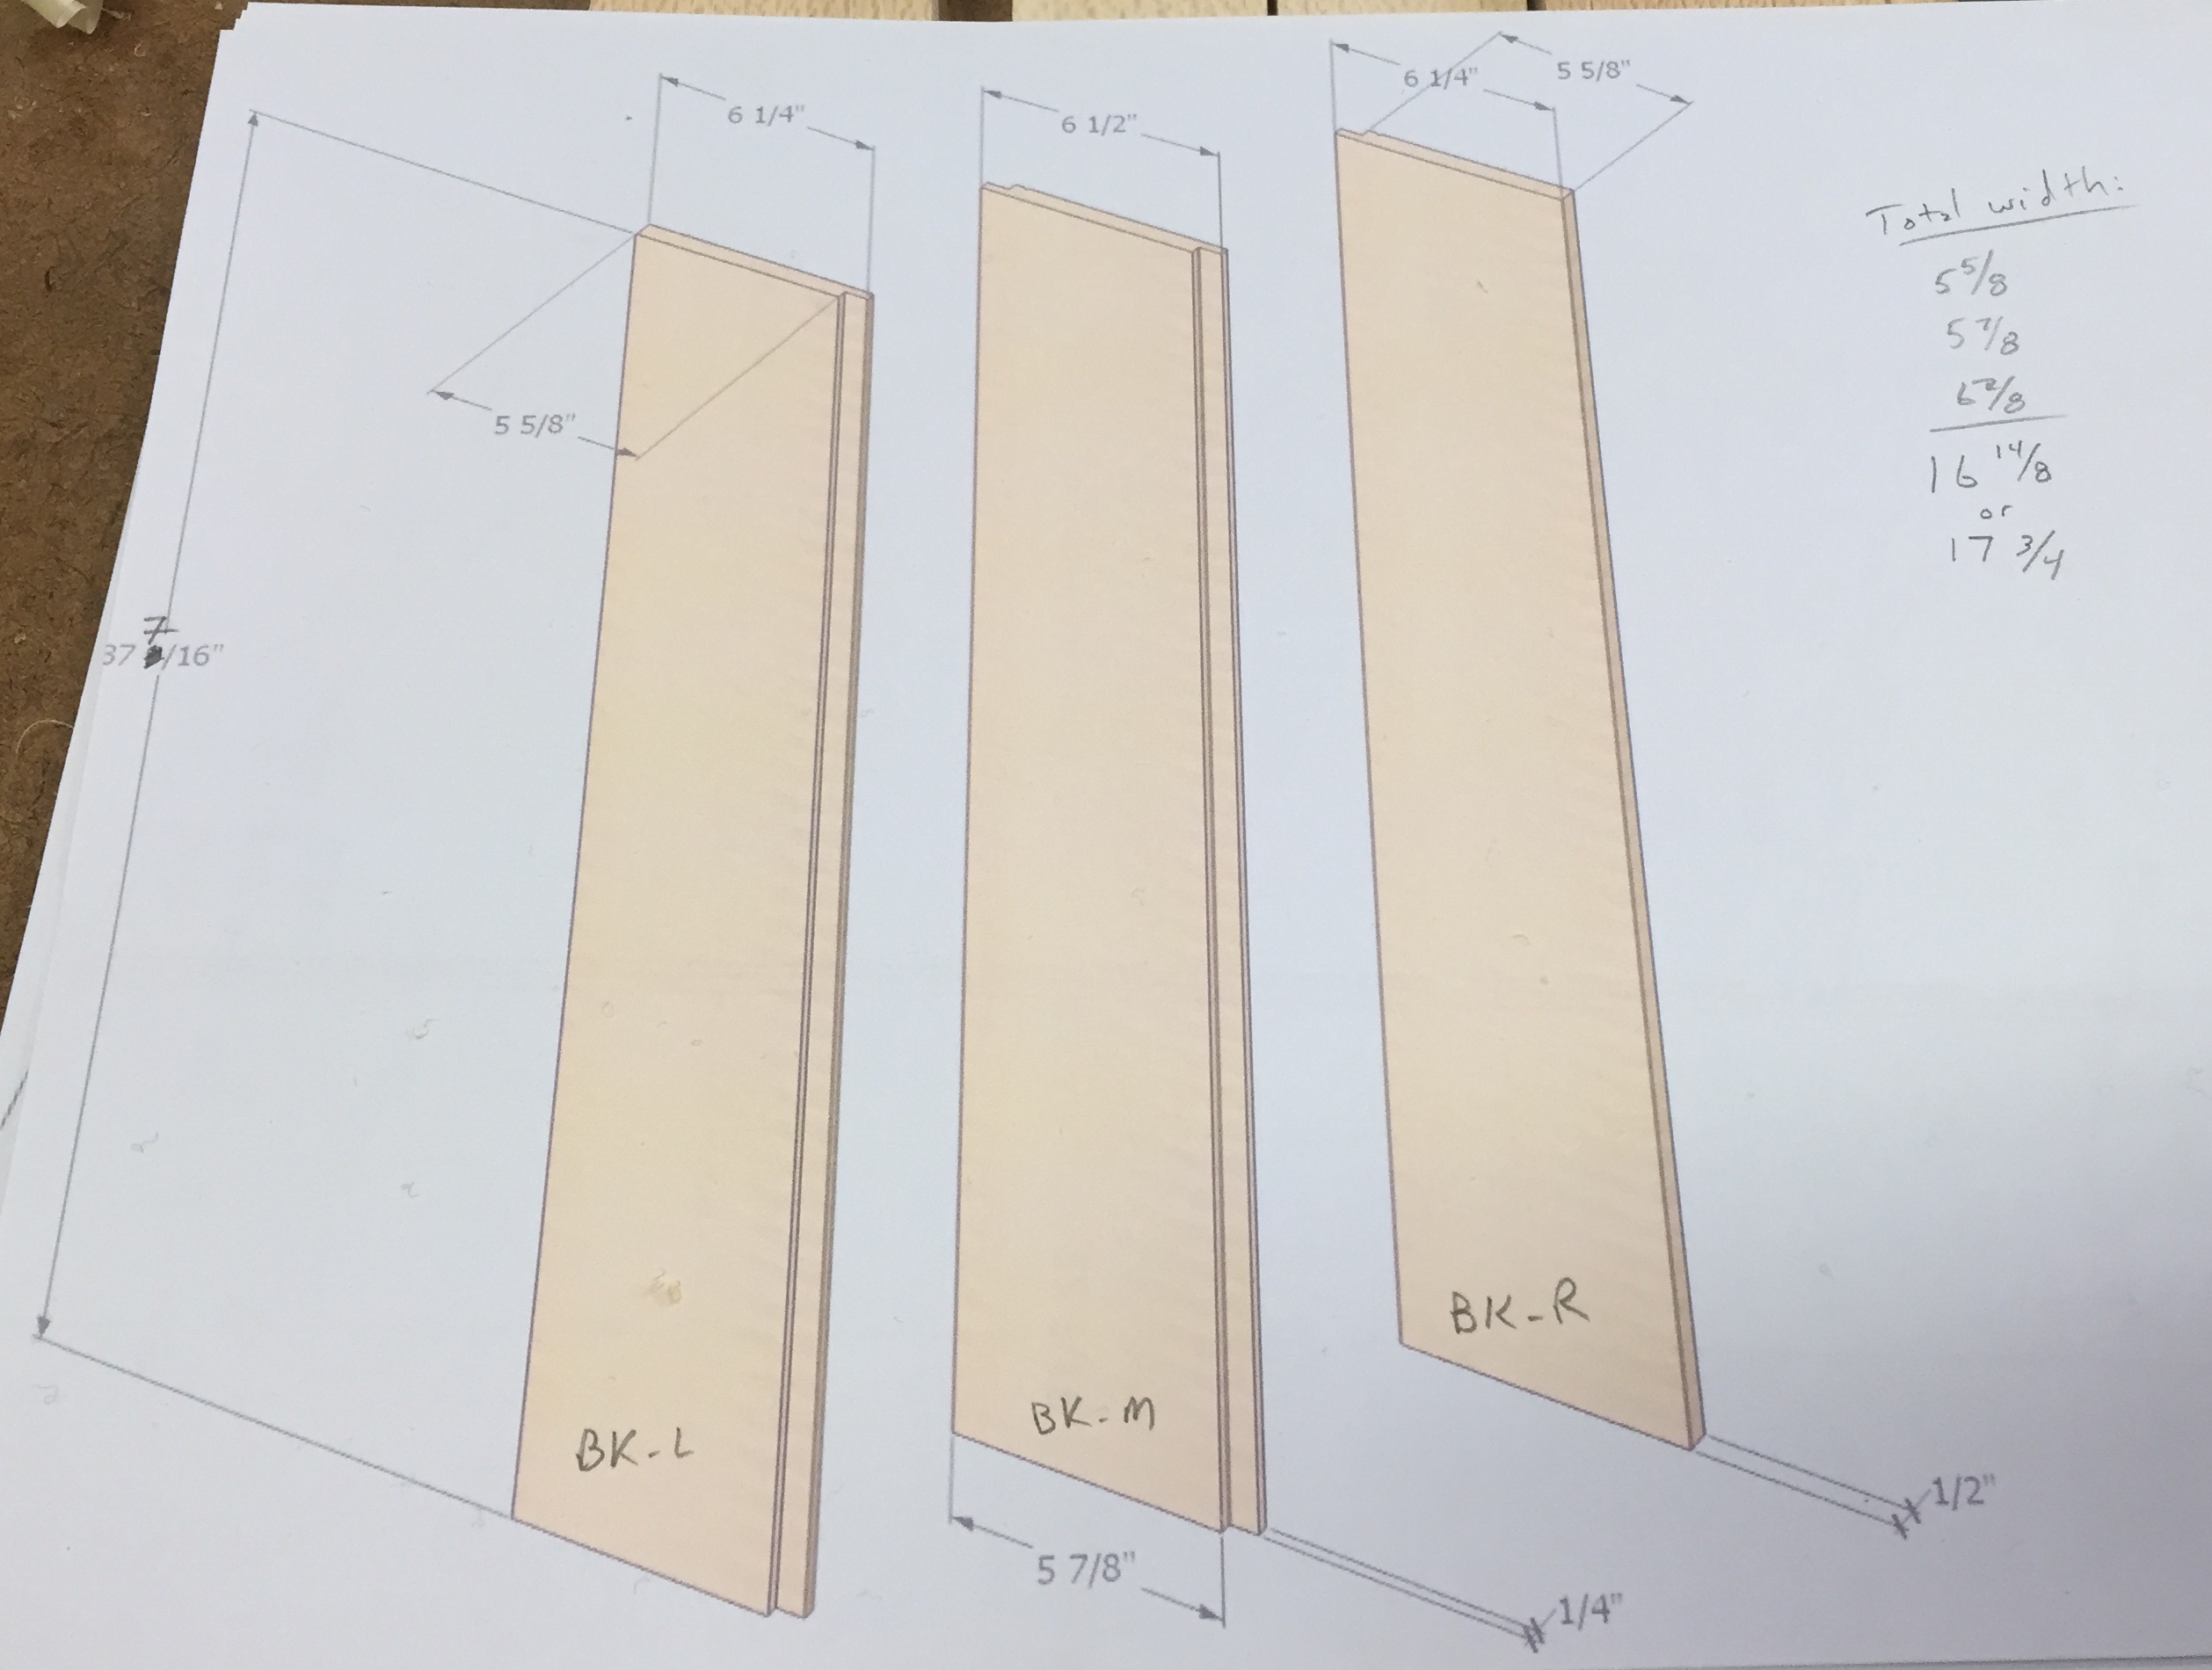 Measurements of back panel shiplapped planks, sized to fit the case